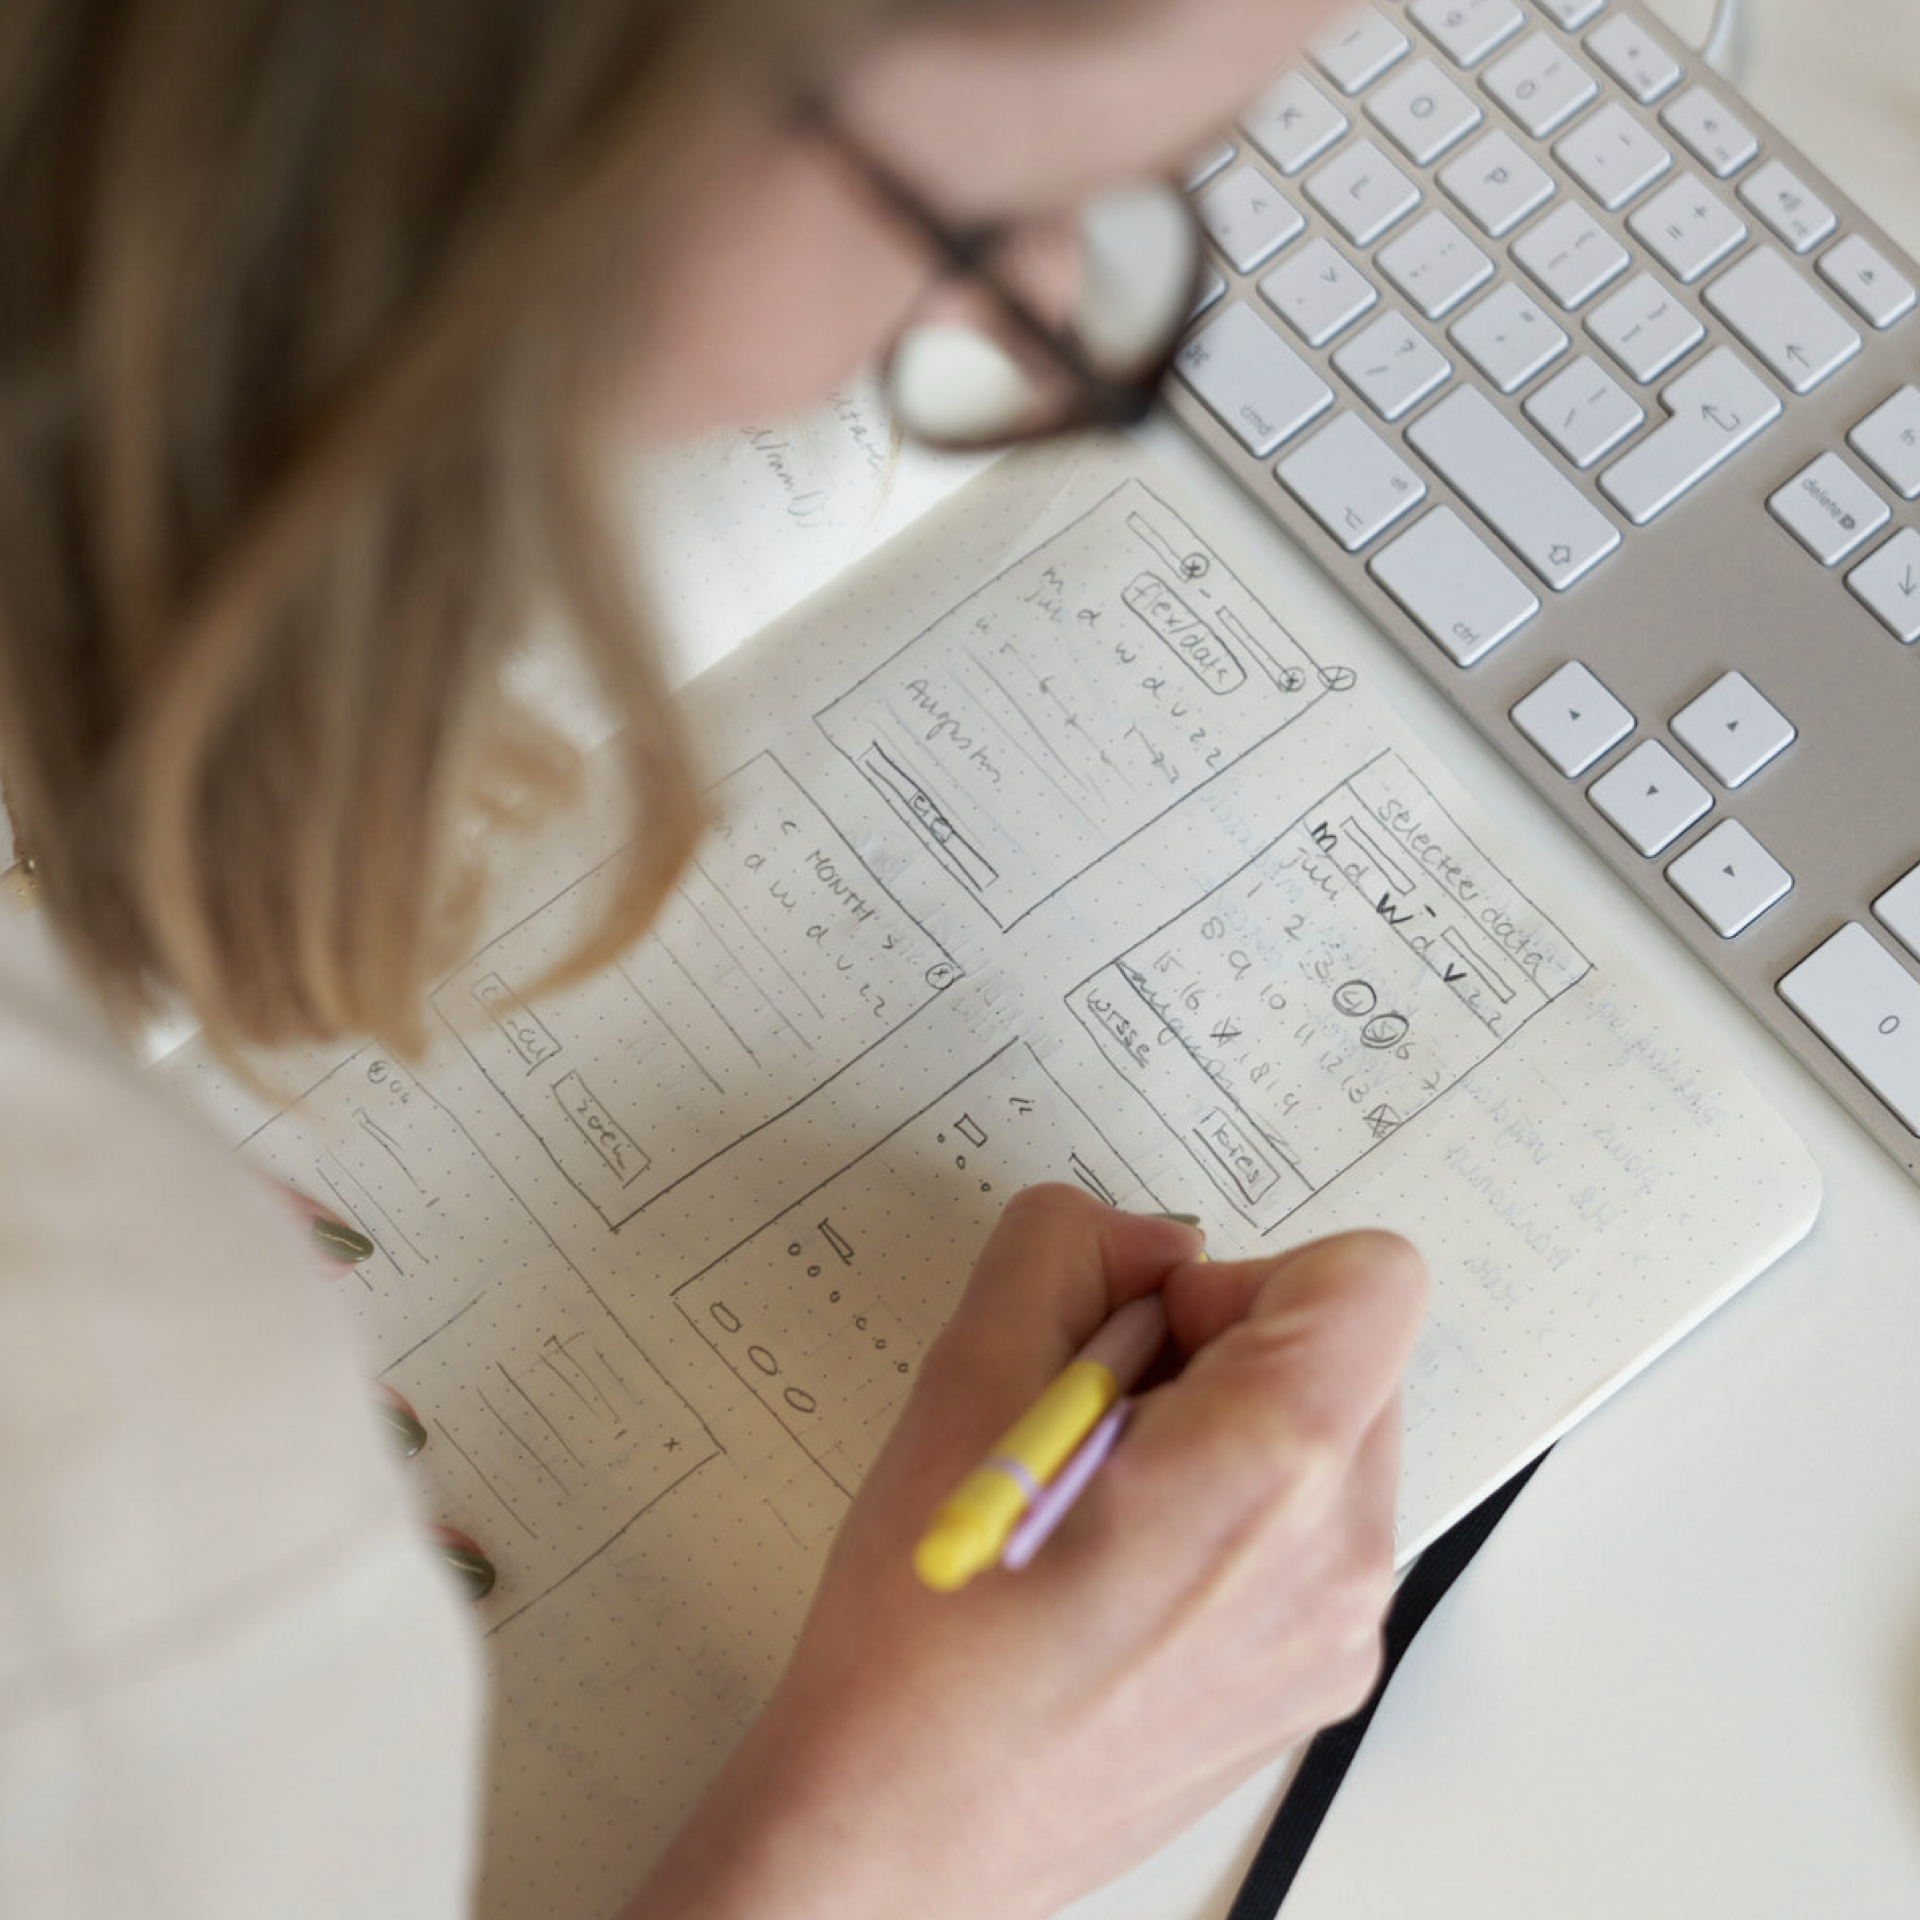 A person sketching out design wireframes in a notebook